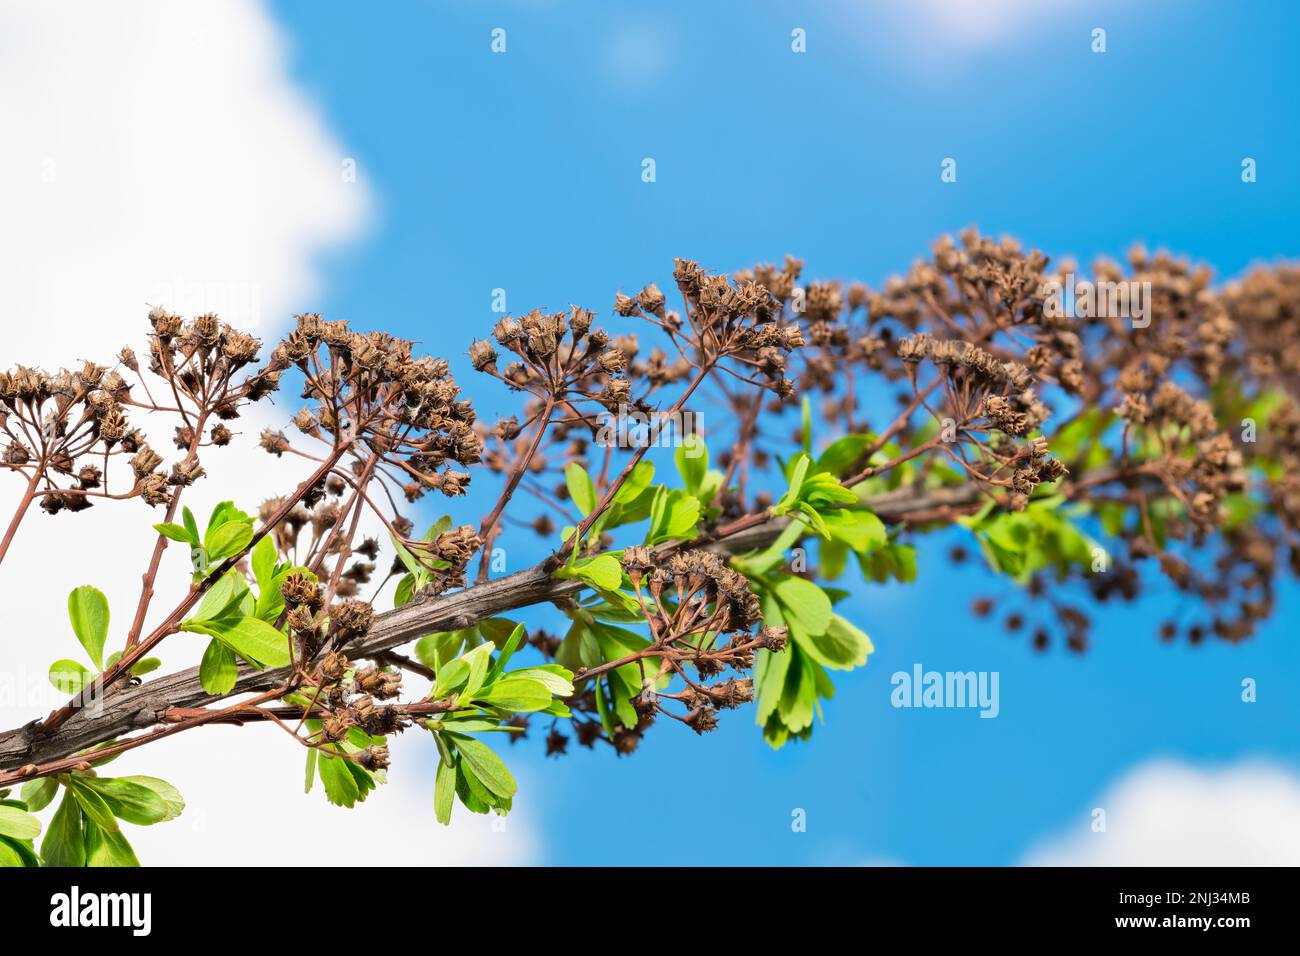 Lush new leaves and dry old inflorescences contrast on spring meadowsweet twig. Spiraea. Young green sprouts and wilted fruits on blue sky background. Stock Photo